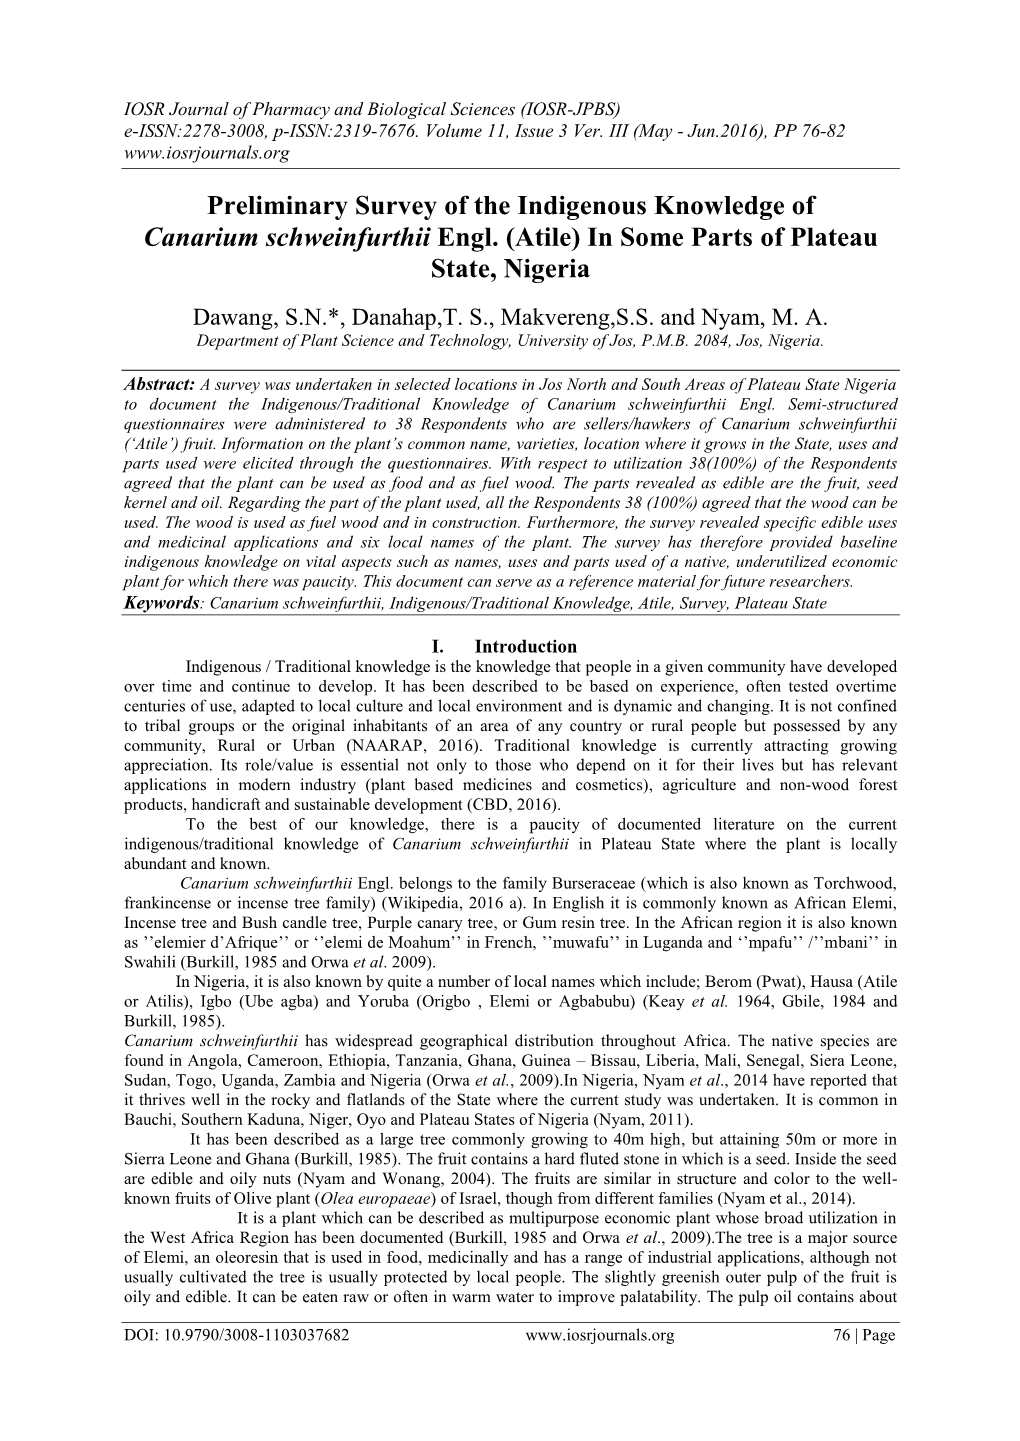 Preliminary Survey of the Indigenous Knowledge of Canarium Schweinfurthii Engl